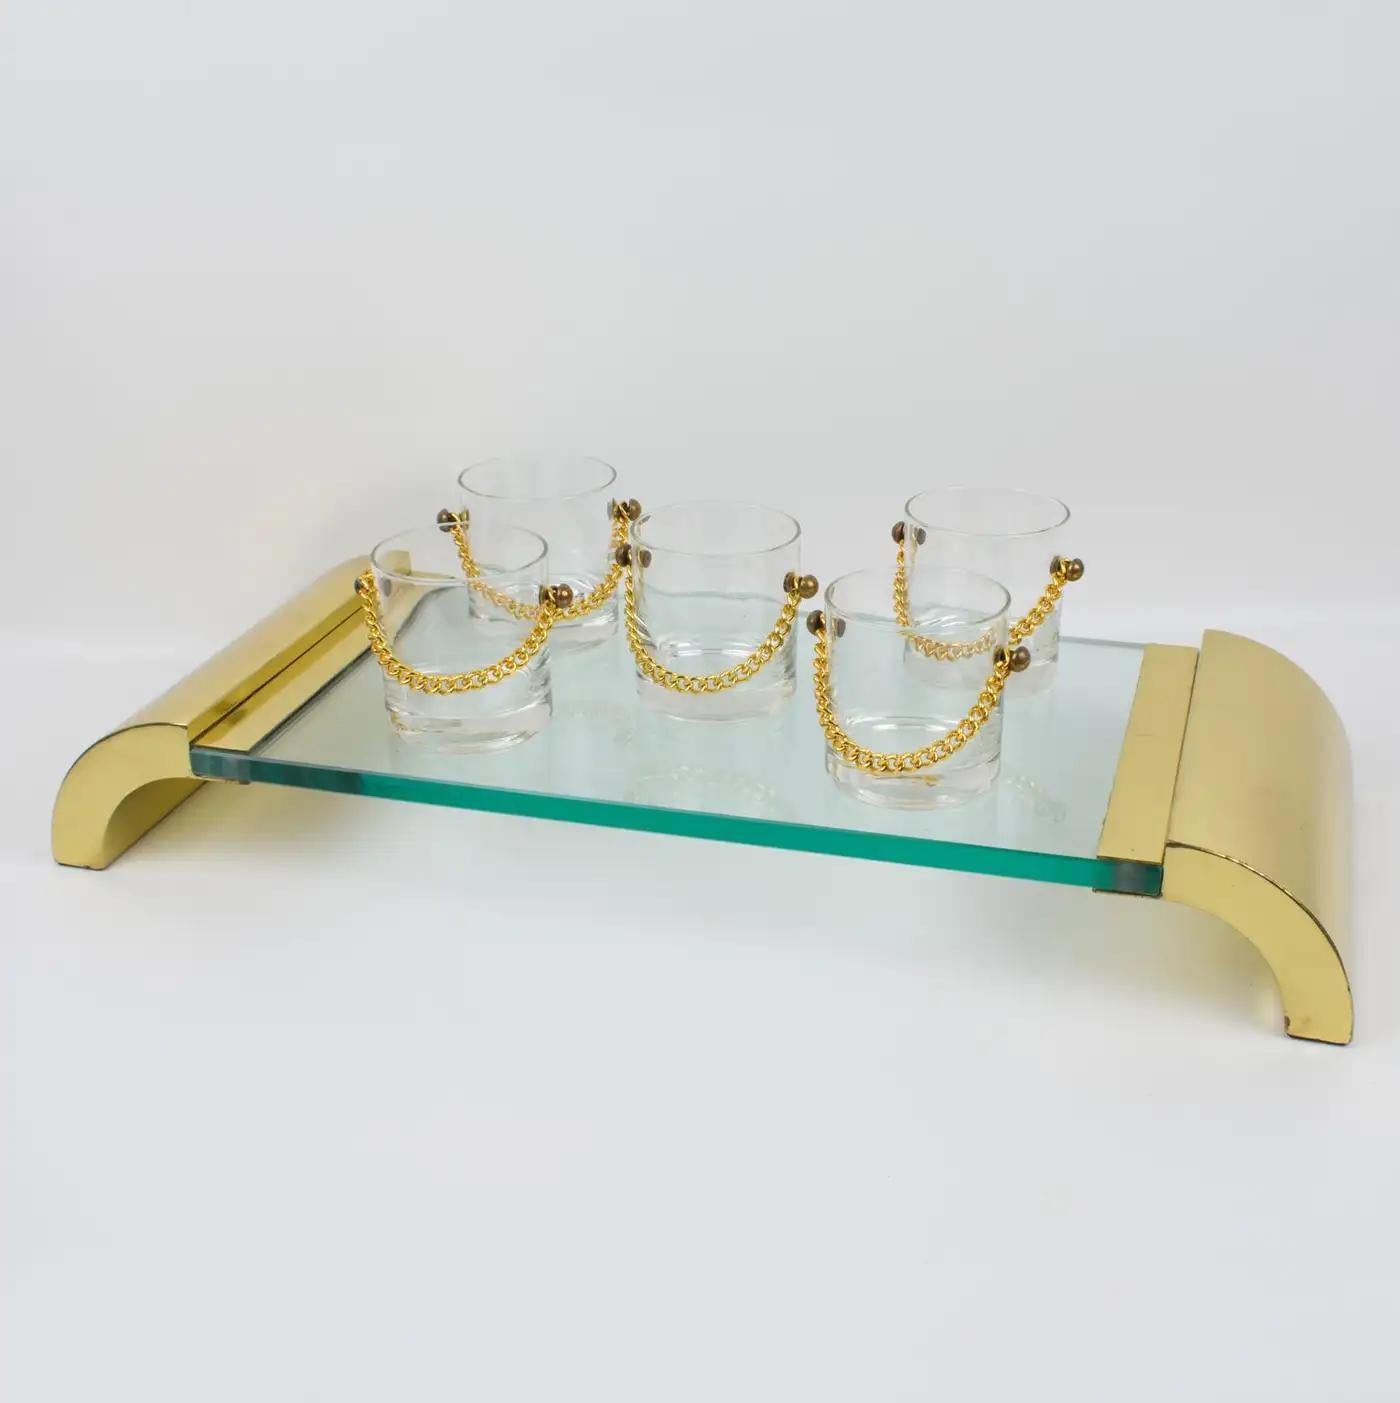 This lovely brass and glass pedestal centerpiece or display tray was designed and crafted in Italy in the 1980s. The presentation piece has a modernist and minimalist design with massive polished brass raised sides, complemented with an extra thick